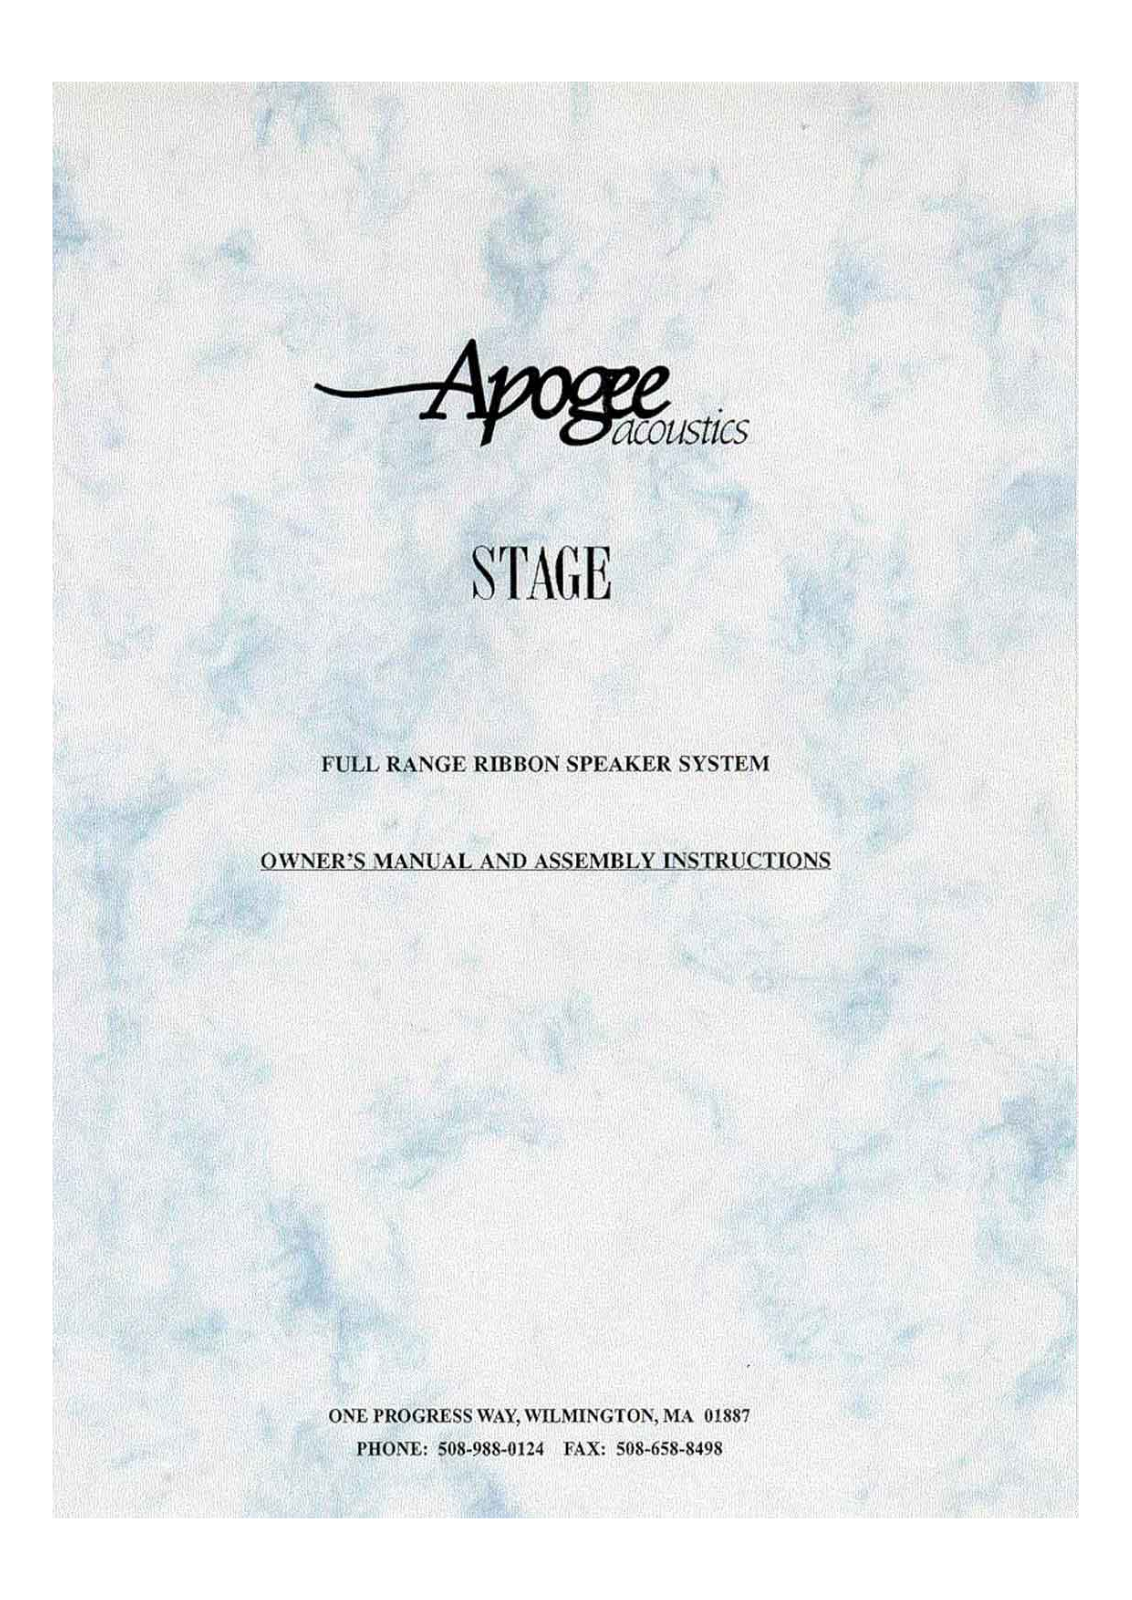 Apogee Stage Owners manual